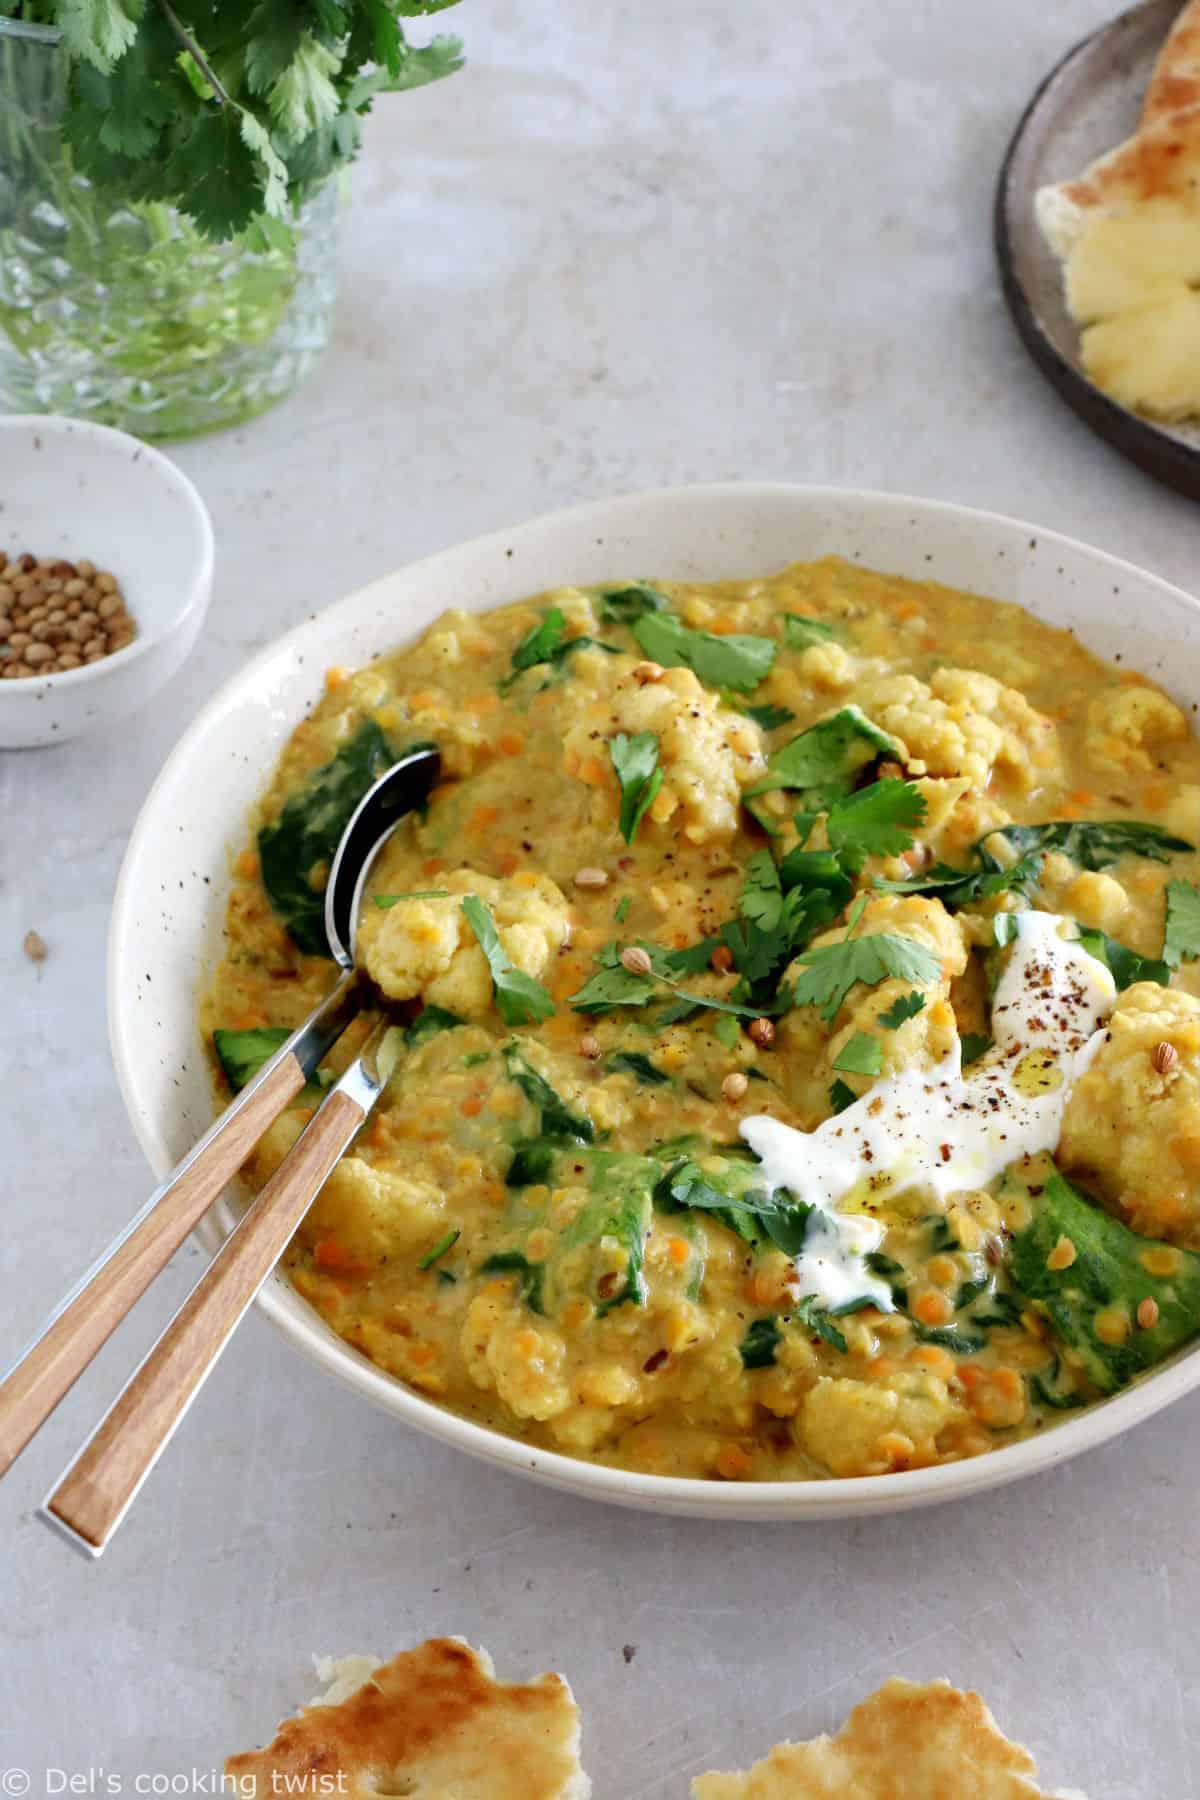 This roasted cauliflower dal is a comforting and satisfying Indian stew, prepared with red lentils, coconut milk, and golden roasted cauliflower.